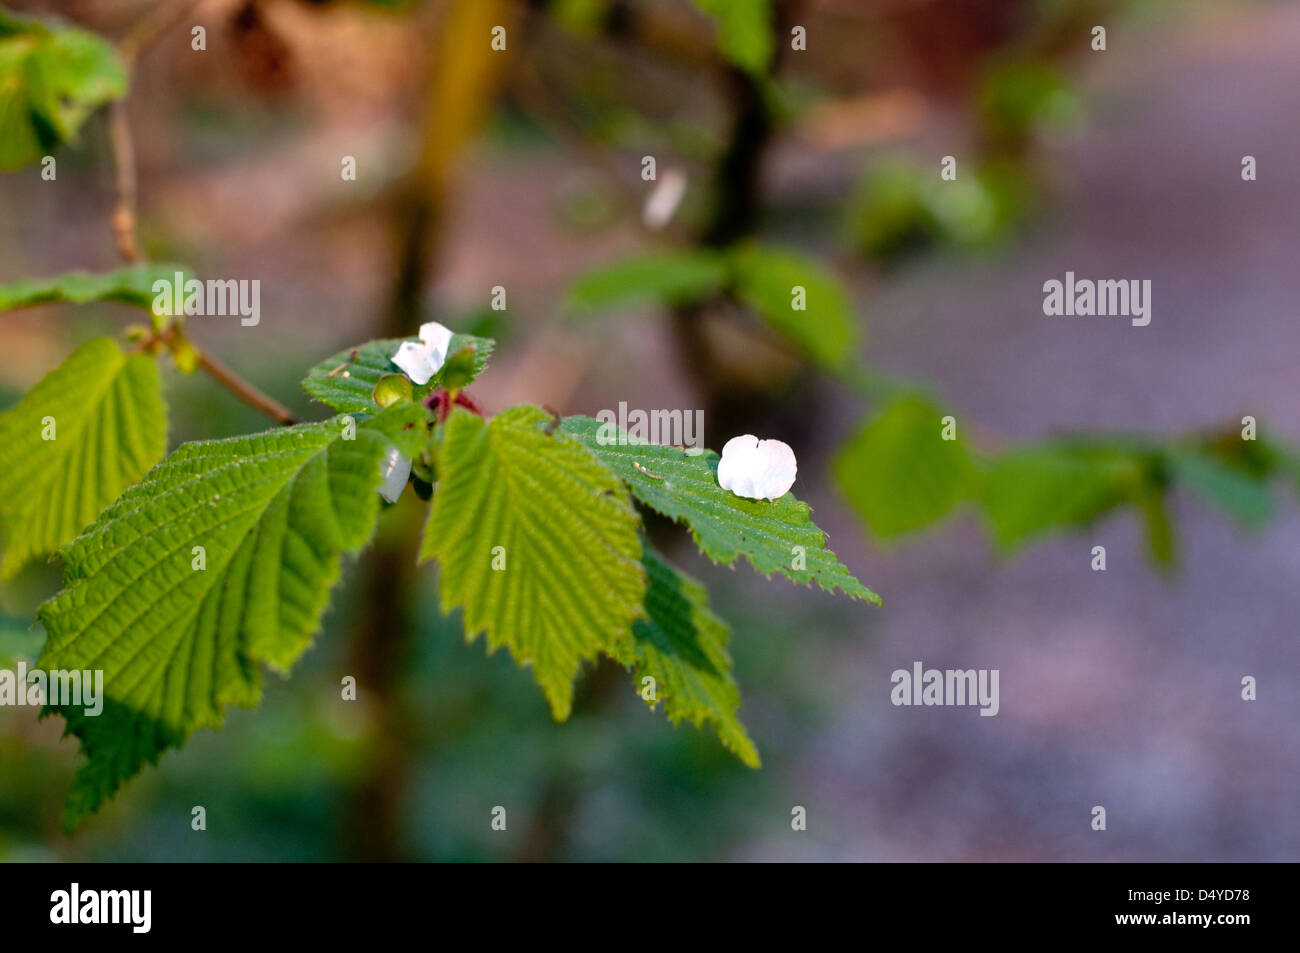 Blossom rests on the leaves of an ash tree during spring in an area of woodland in Kenilworth, England. Stock Photo